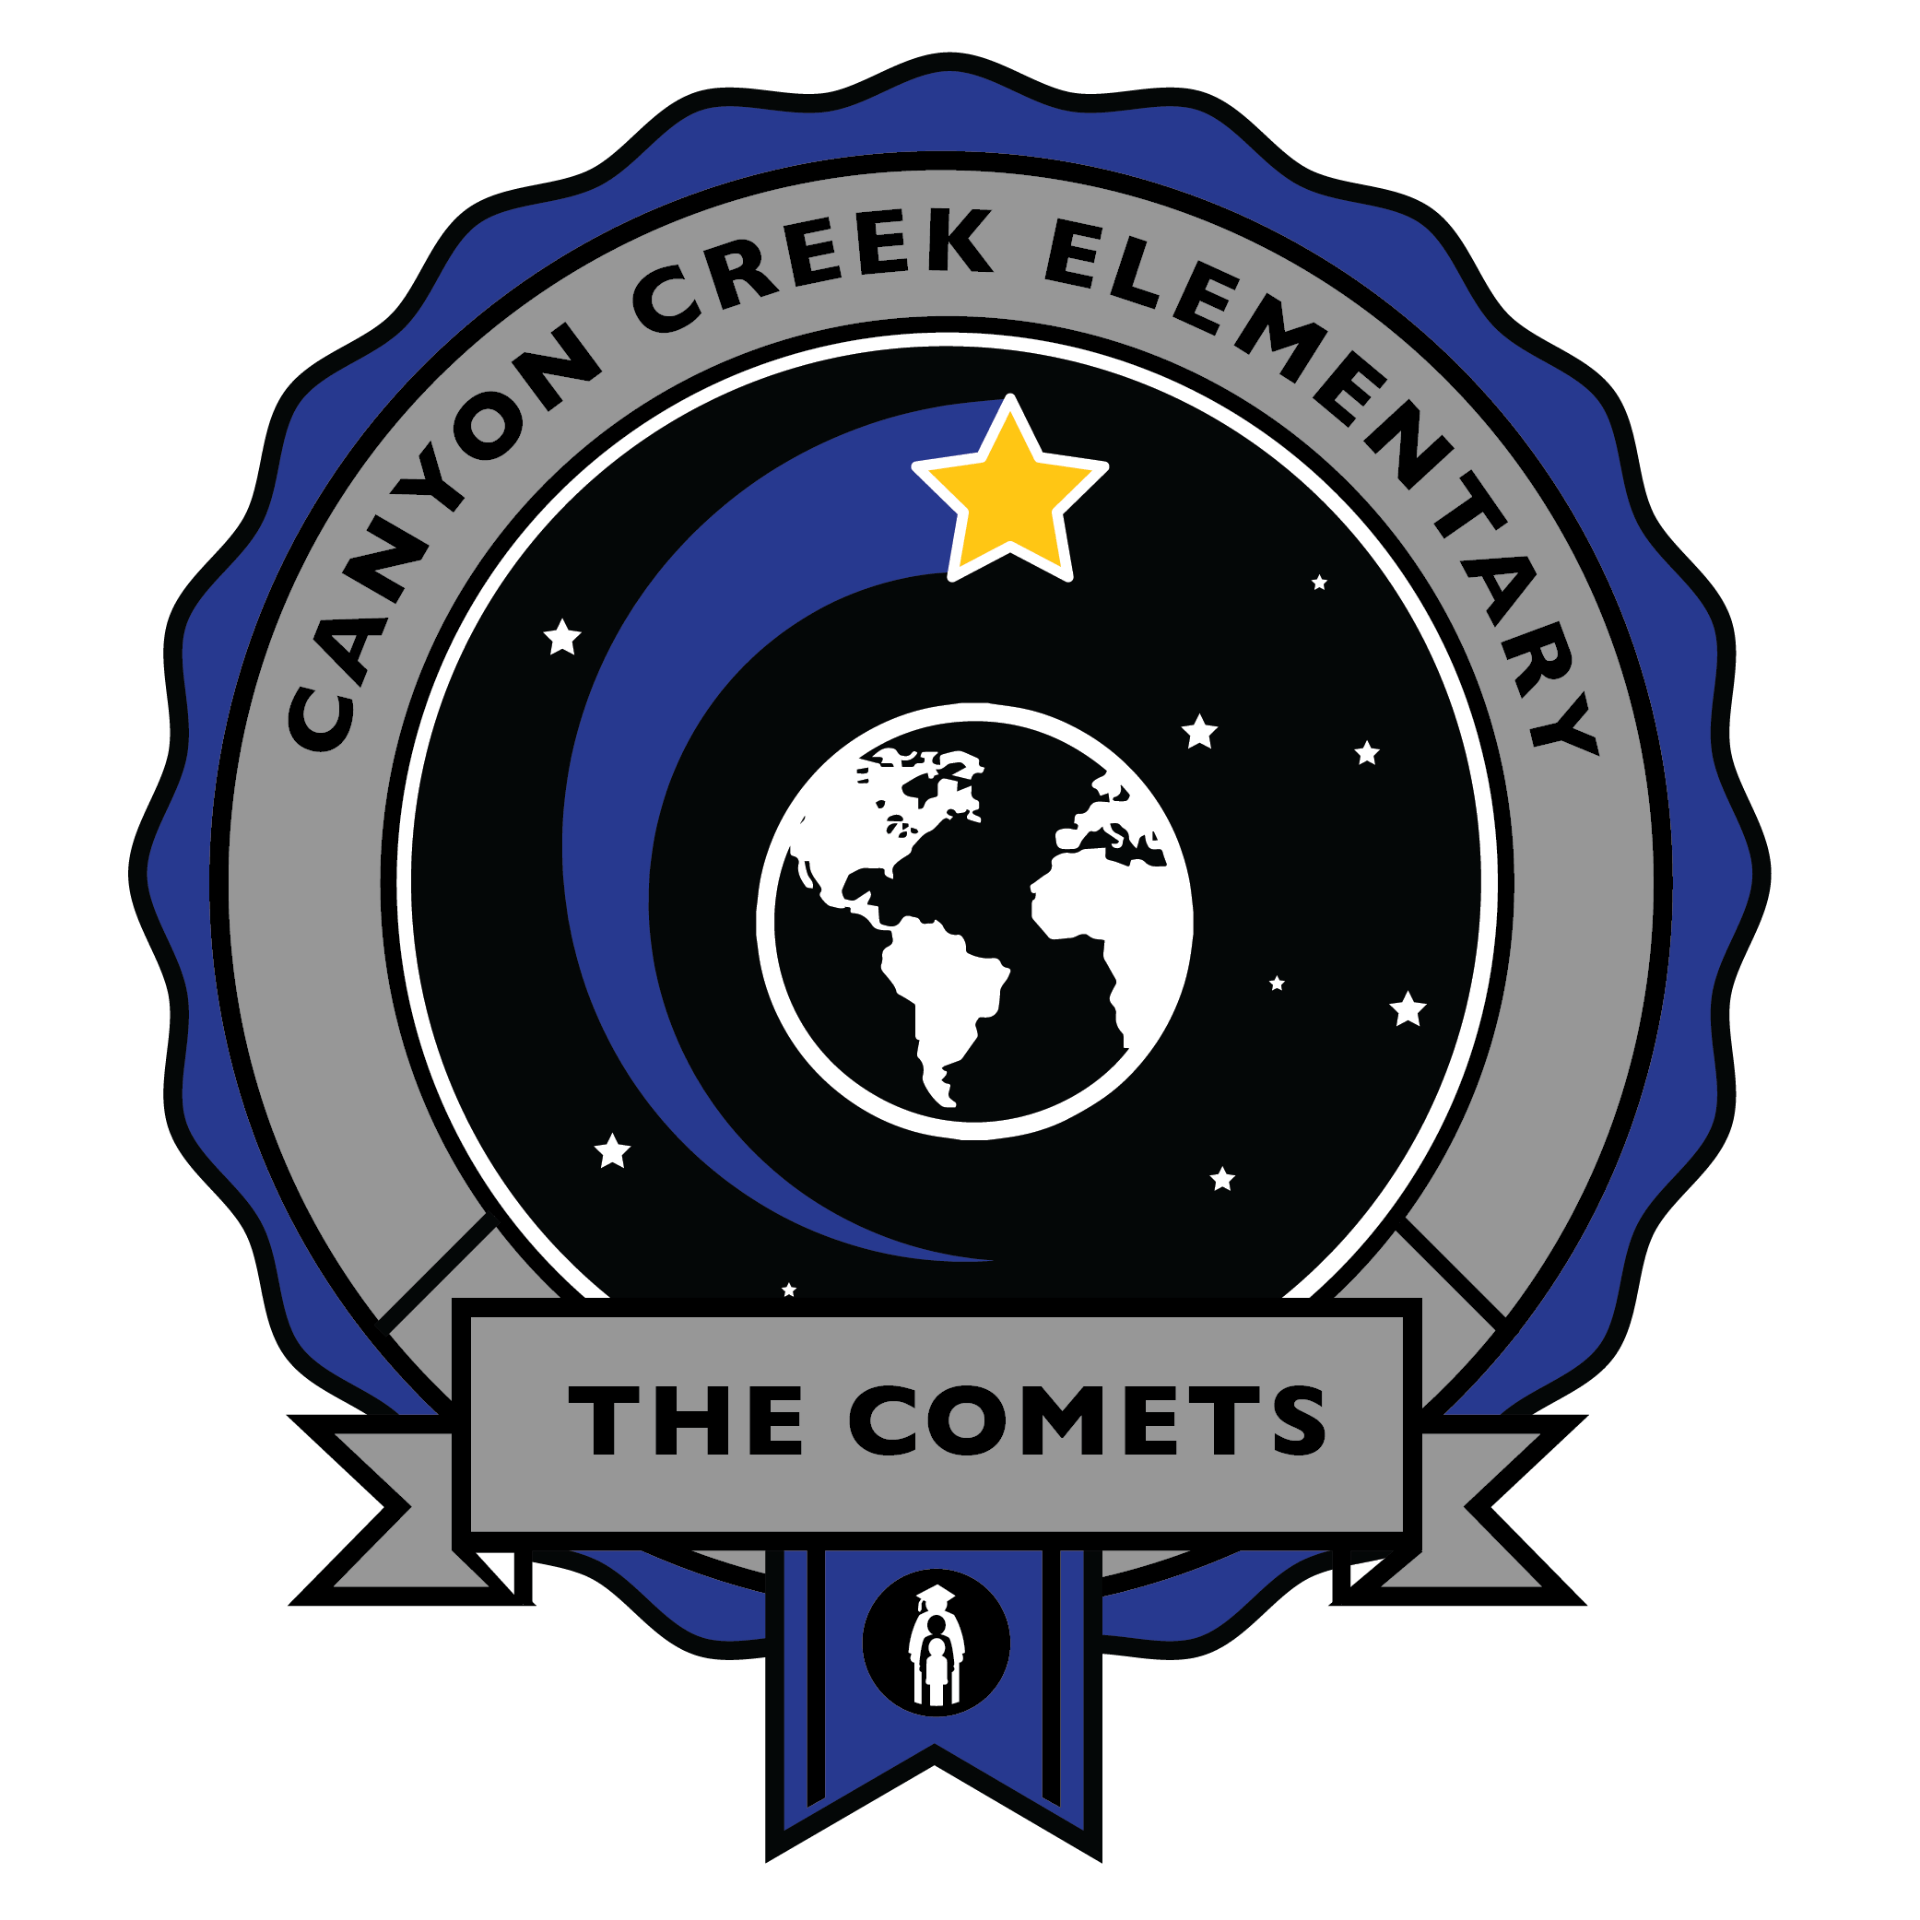 About Canyon Creek Elementary School